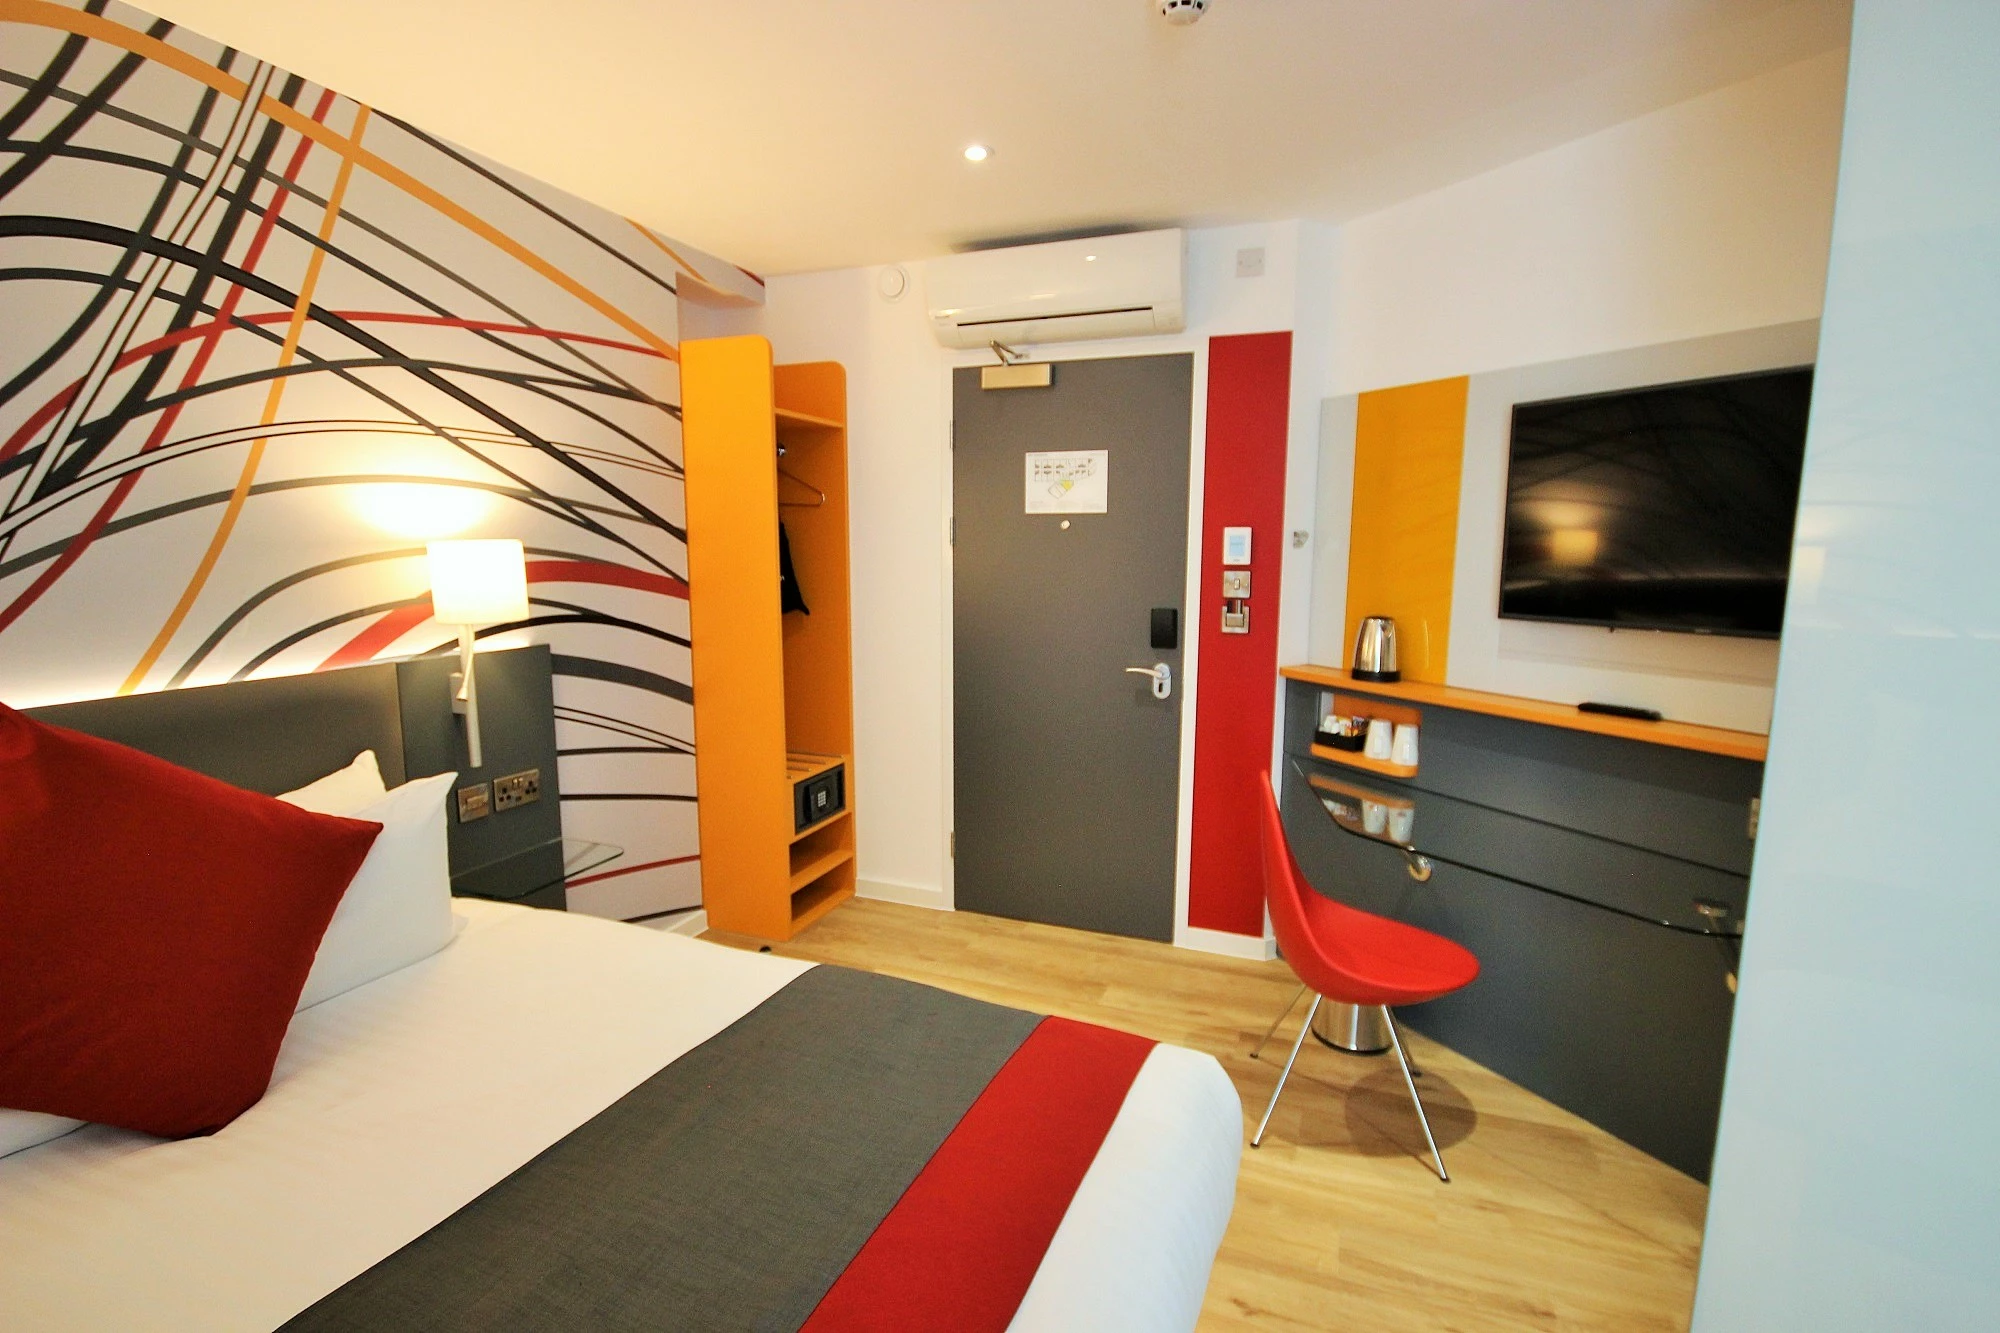 Sleeperz Hotels re-opens Cardiff hotel unveiling 21-room expansion